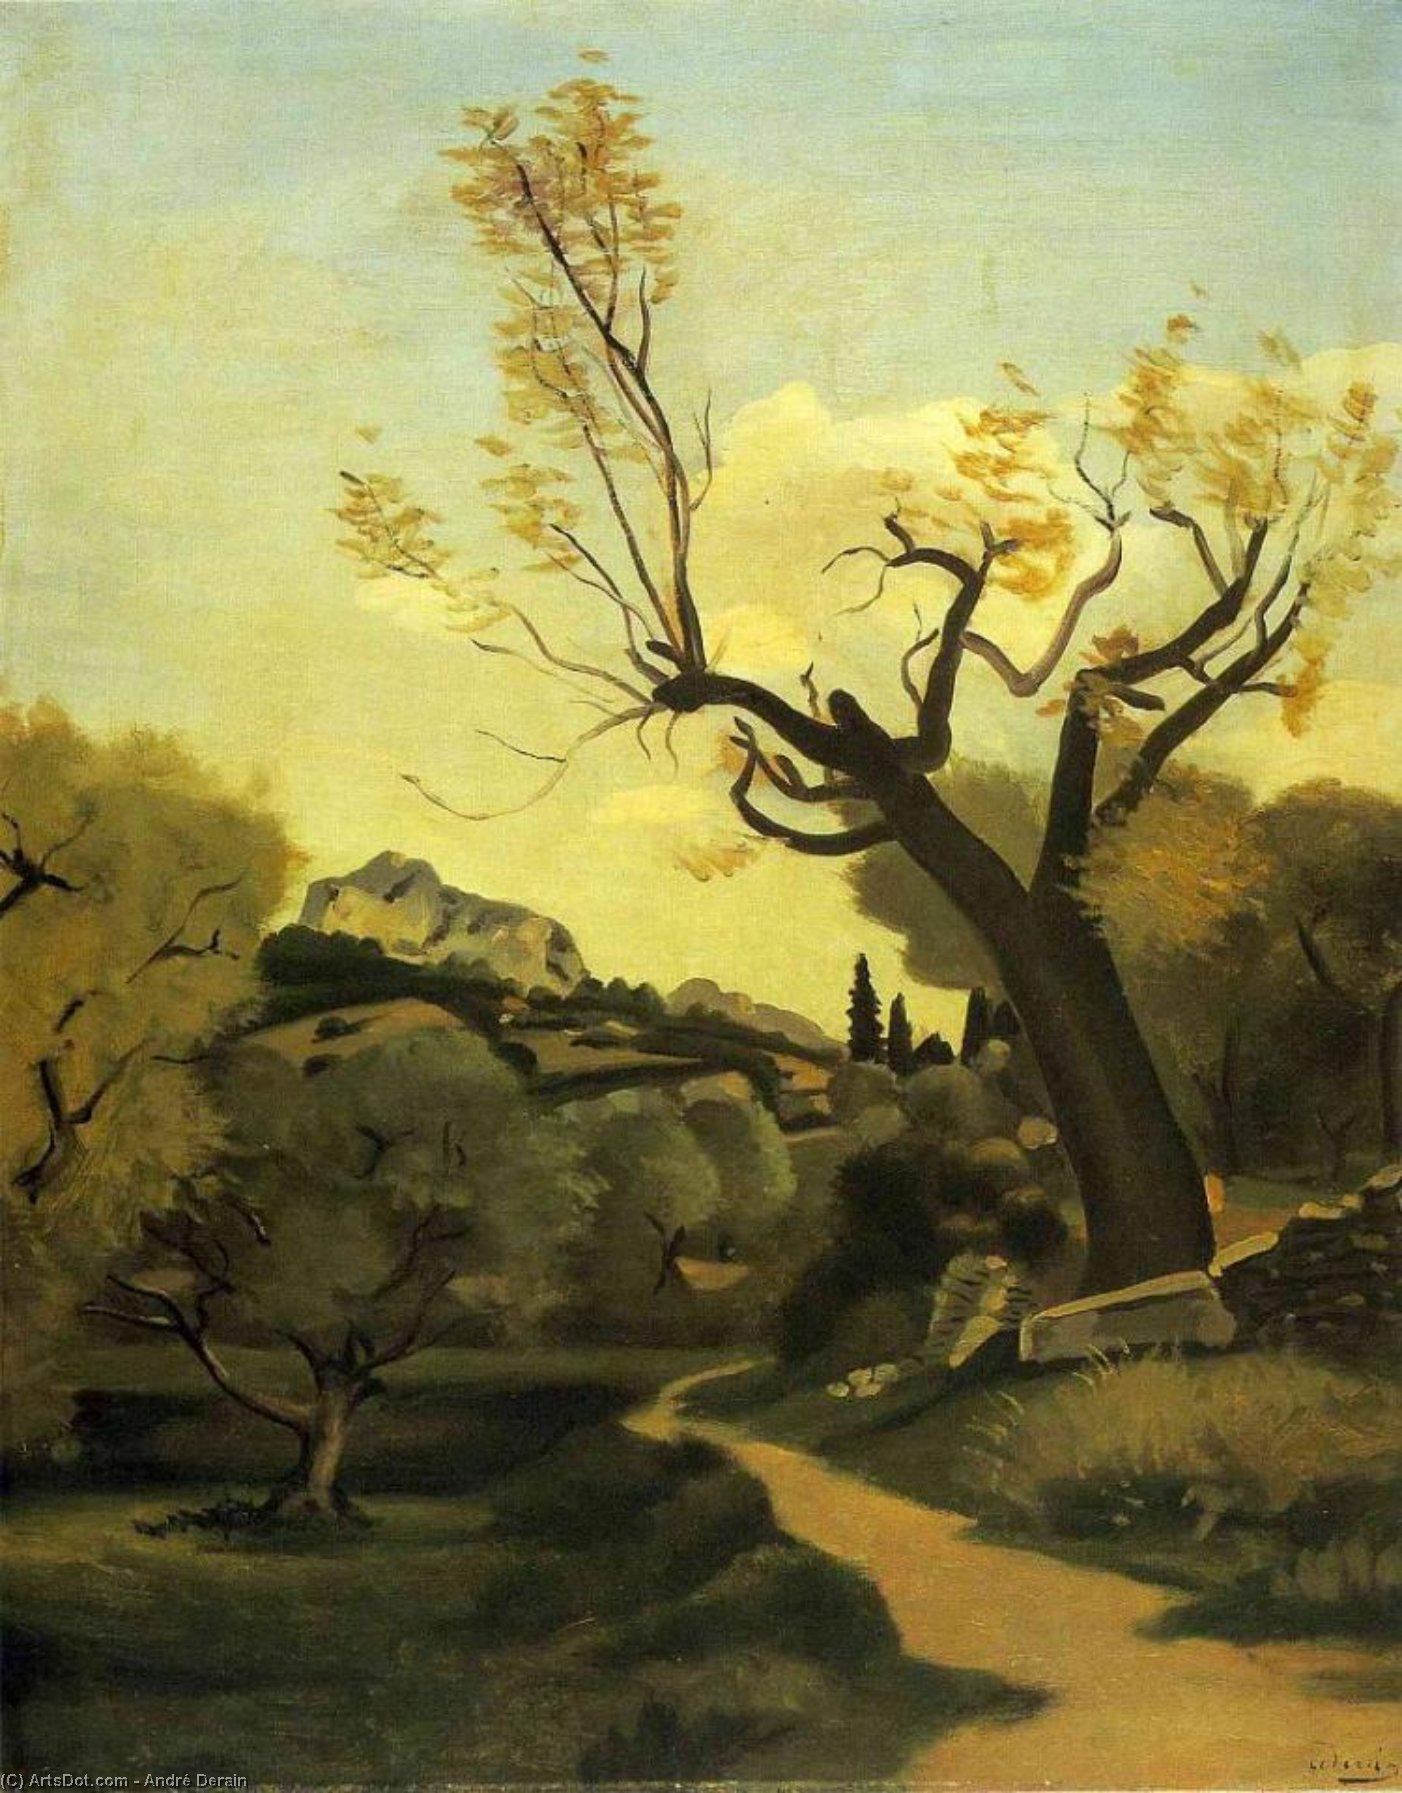 WikiOO.org - 백과 사전 - 회화, 삽화 André Derain - The road and the tree